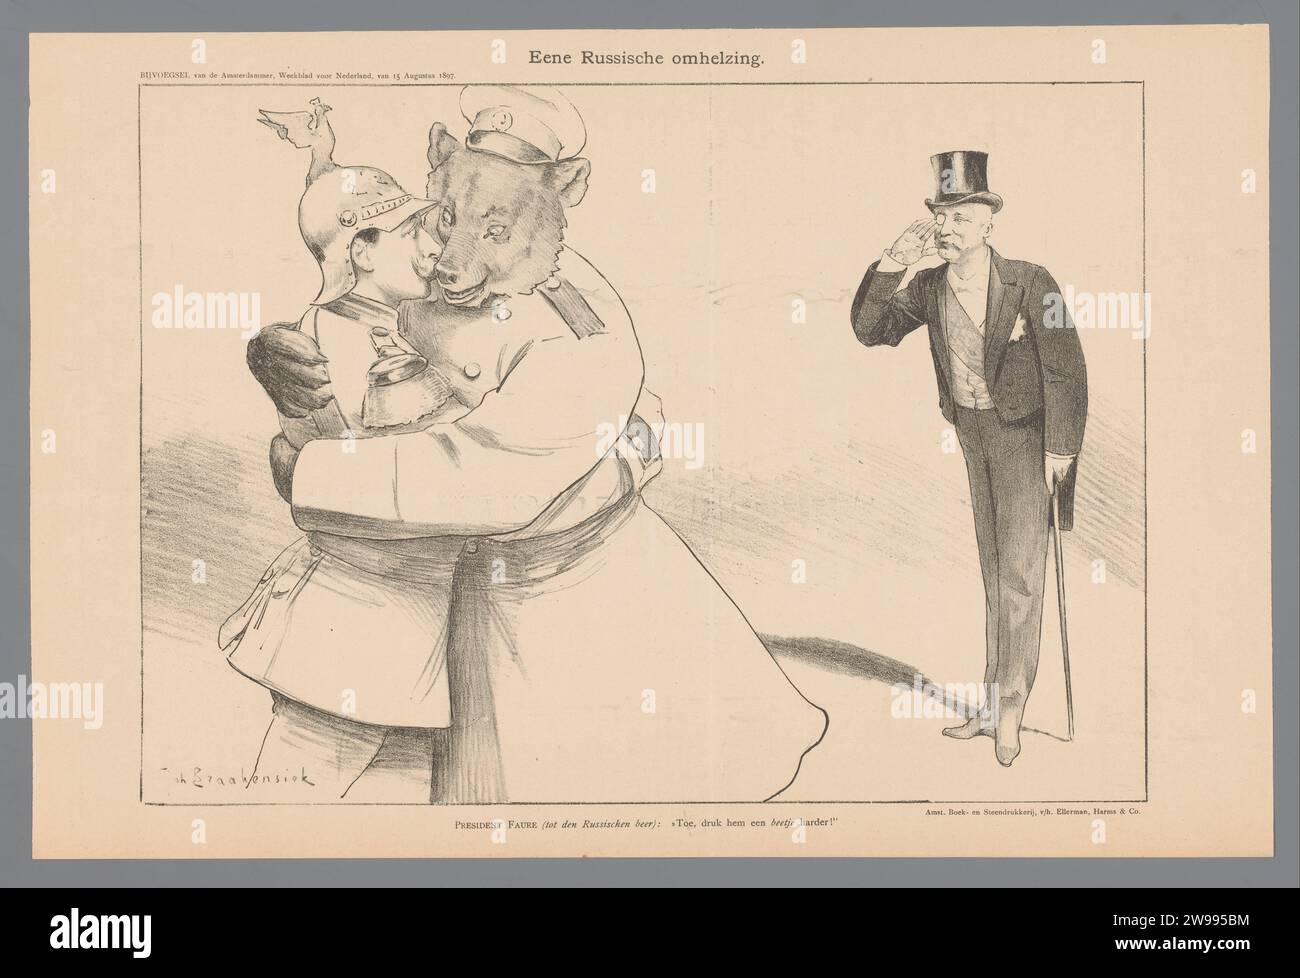 A Russian embrace, Johan Braakensiek, 1897   Amsterdam paper  personifications of countries, nations, states, districts, etc. (+ nation; national). alliance, league, union, foedus. historical persons. political caricatures and satires Stock Photo